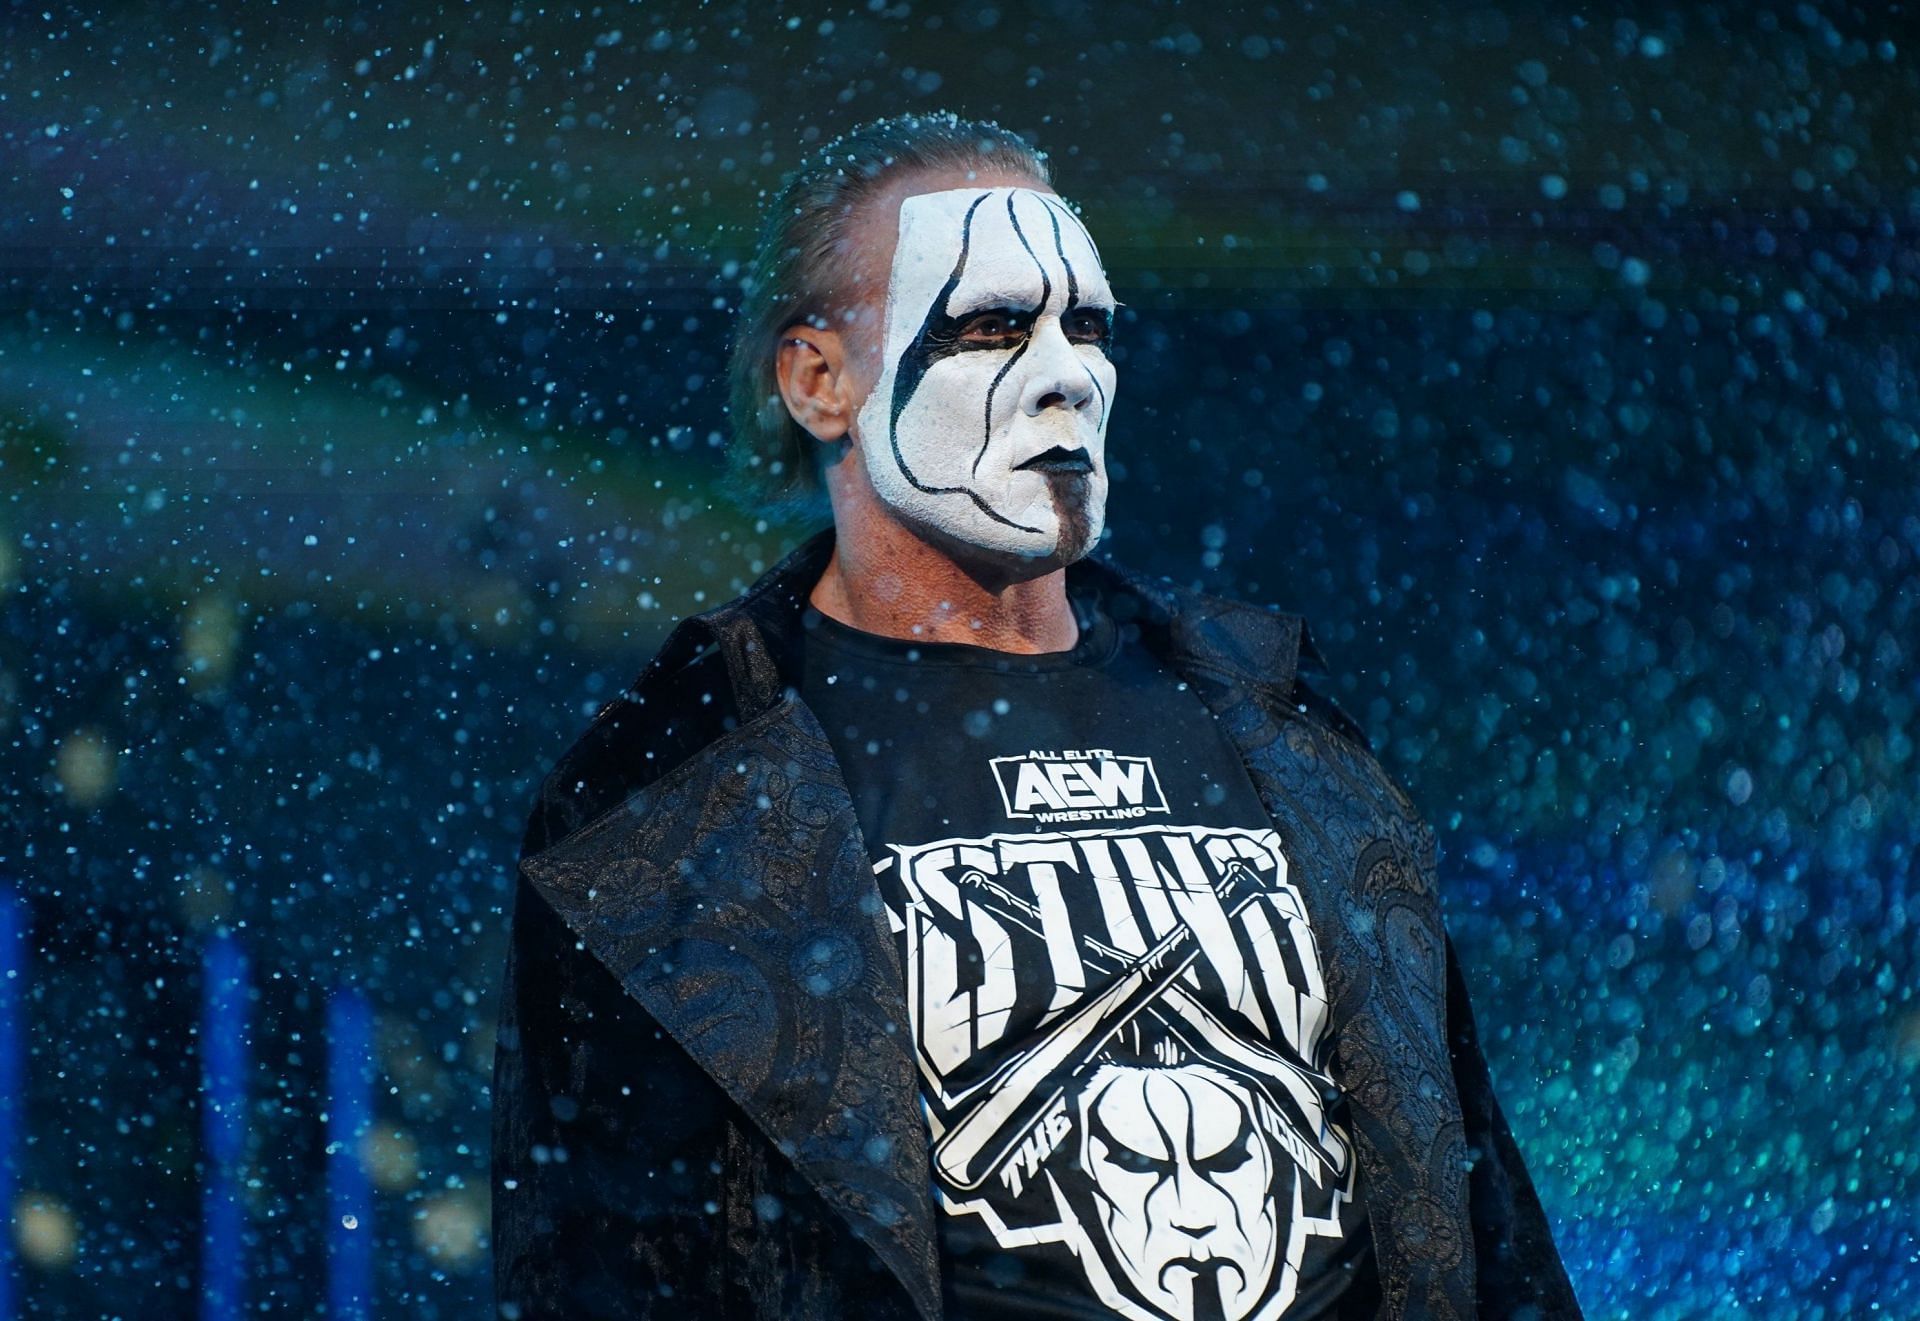 Sting was the greatest WCW wrestler to sign a WWE contract